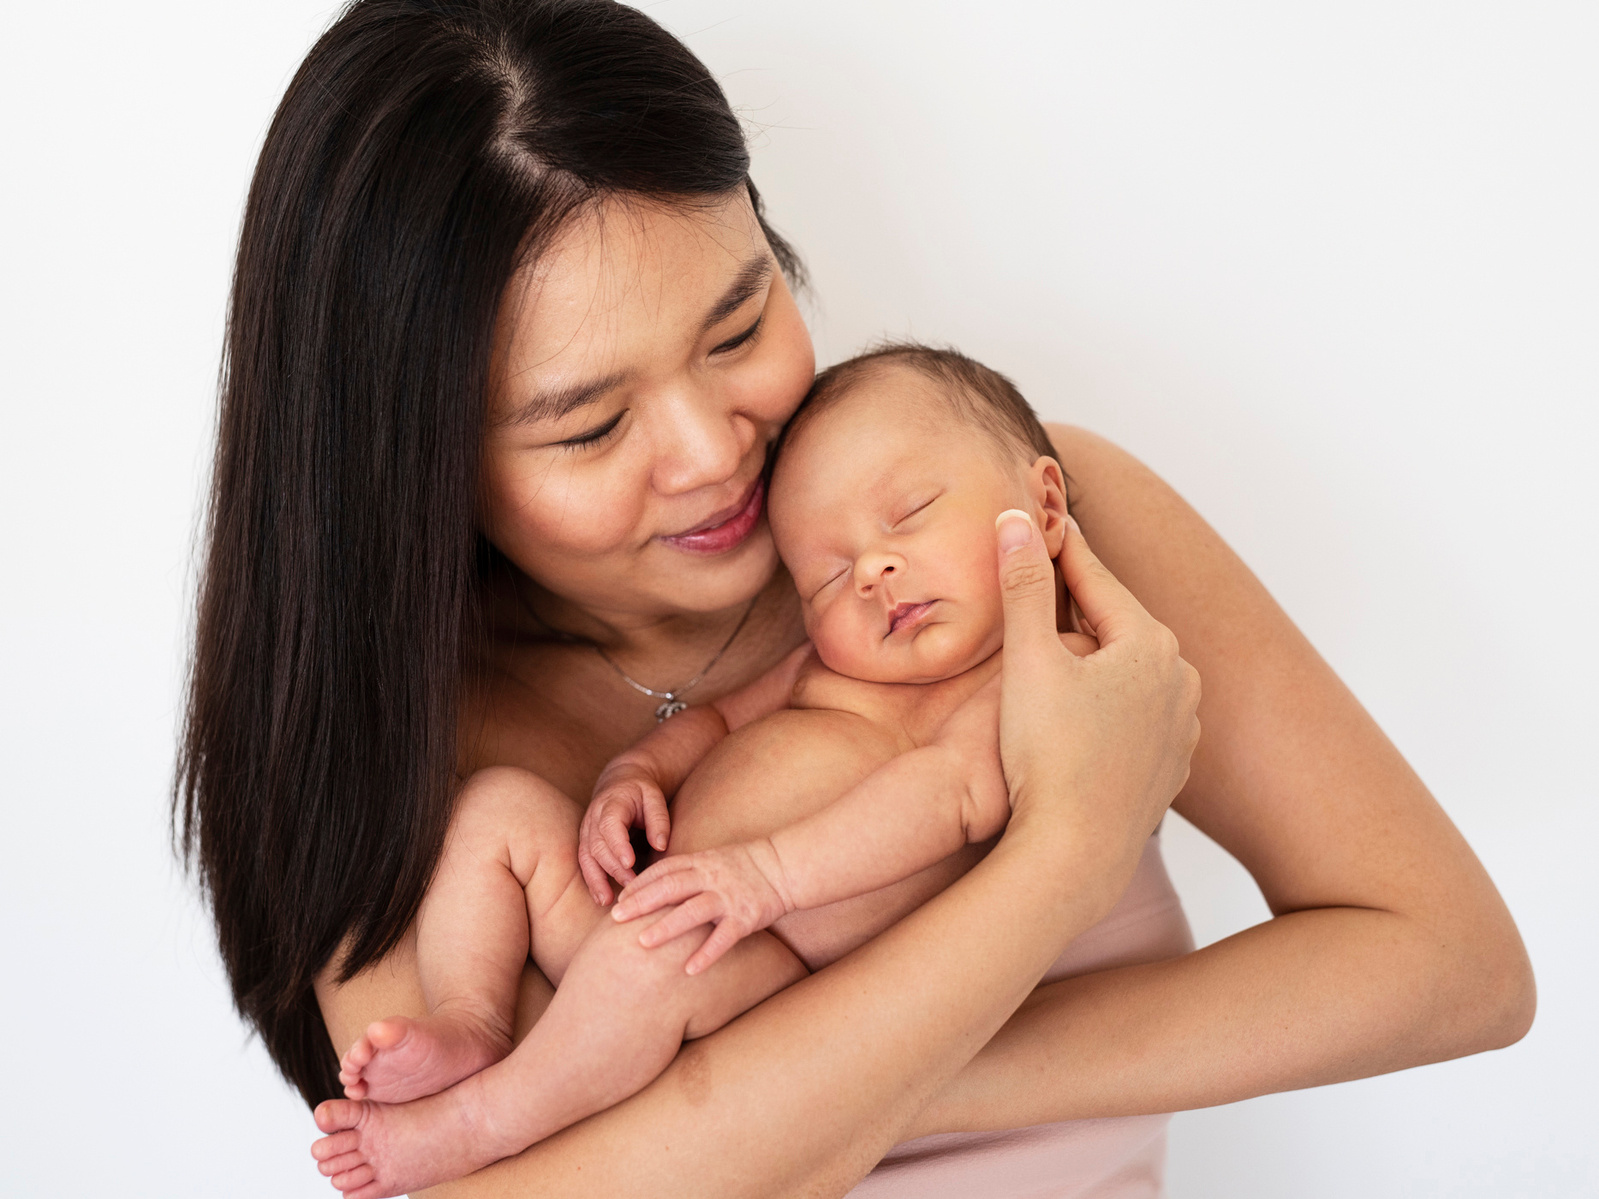 Mother cradles her newborn baby son in her arms for a photographic portrait which she will cherish for many many years. Photographed by Geneva's leading family and newborn photographer, Helen Putsman who is based in Chêne-Bougeries.